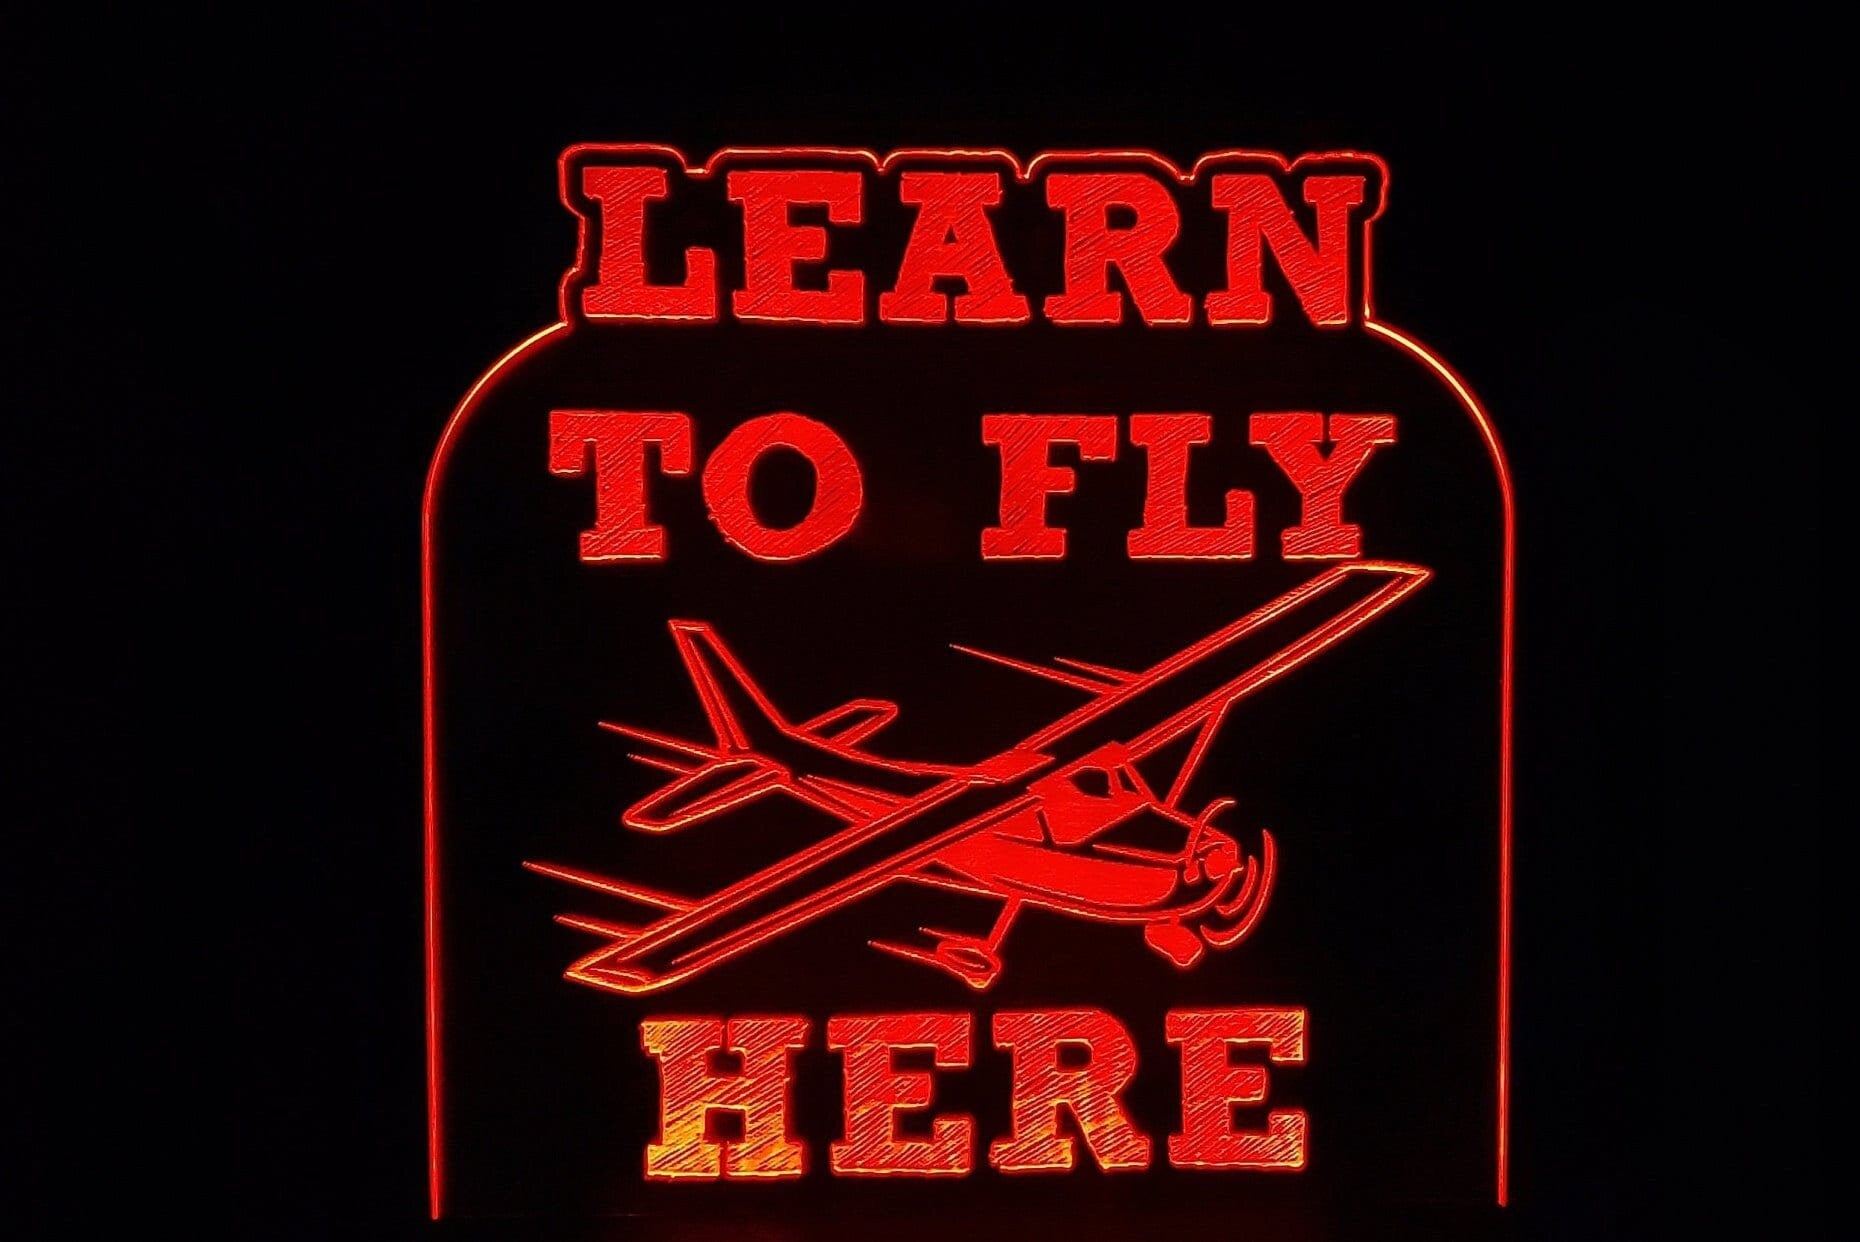 High Wing - Learn to Fly Here LED light lamp/sign - Neon-like - Free shipping - Made in USA.